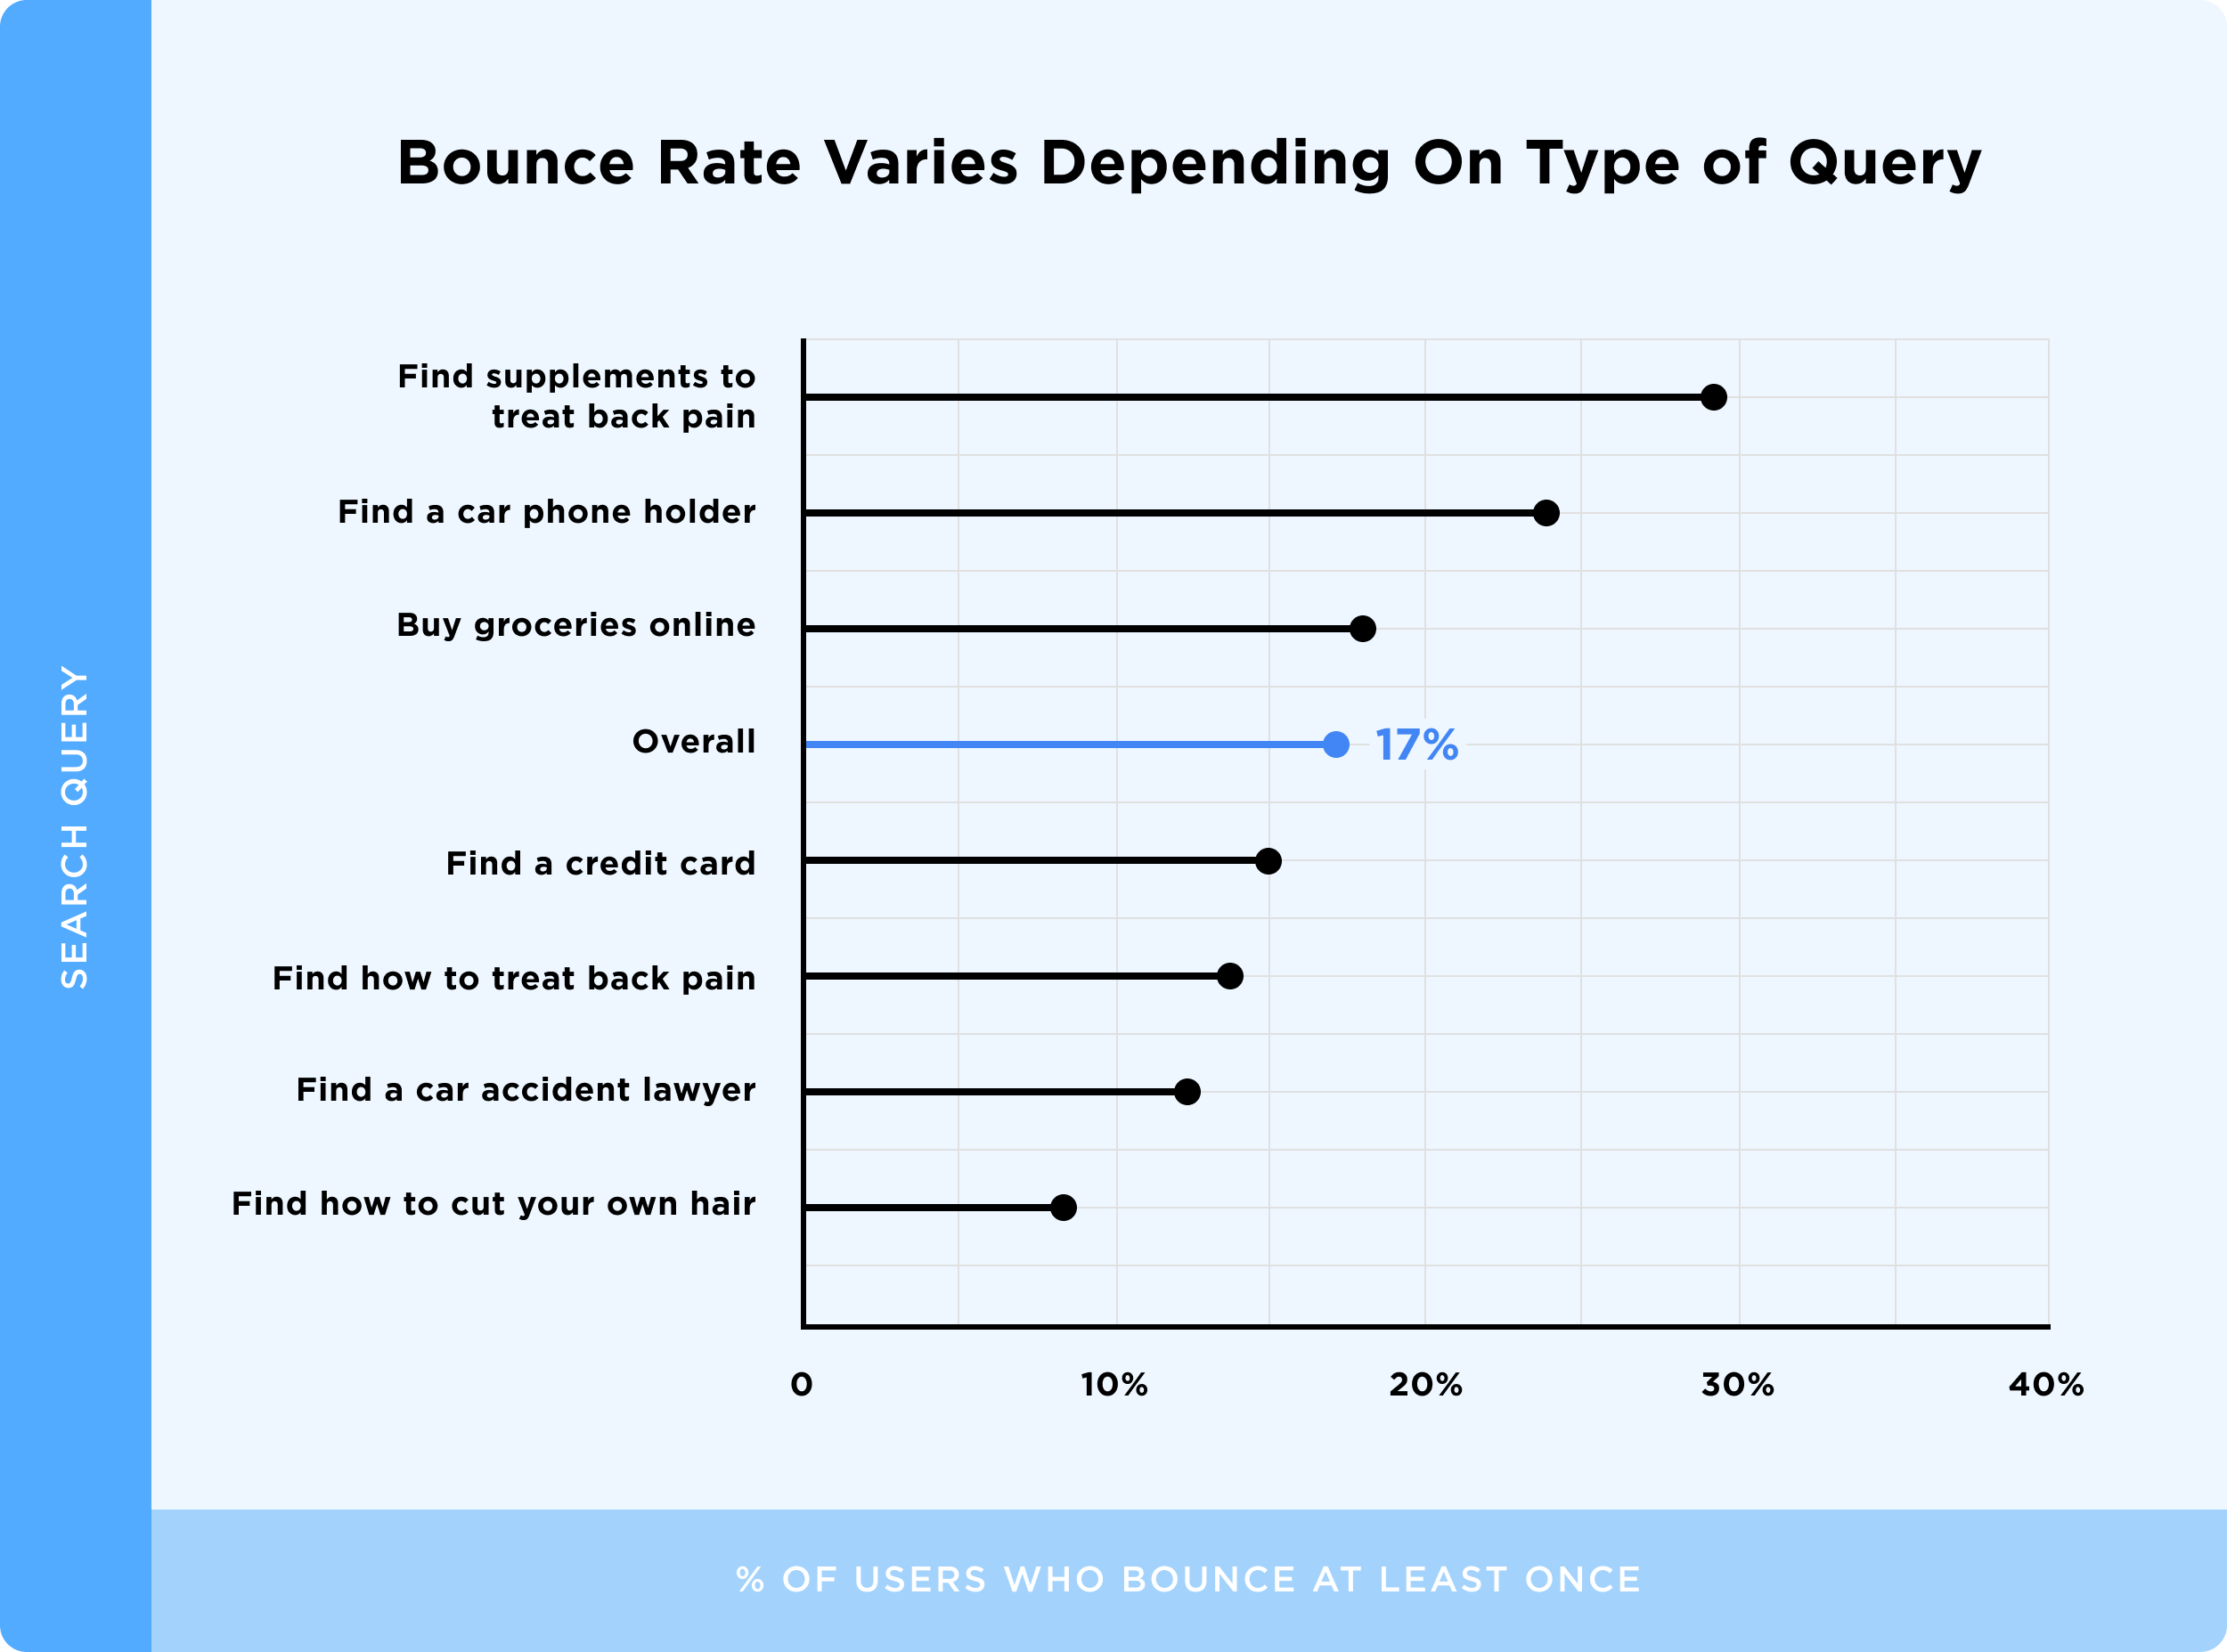 Bounce Rate Varies Depending On Type of Query